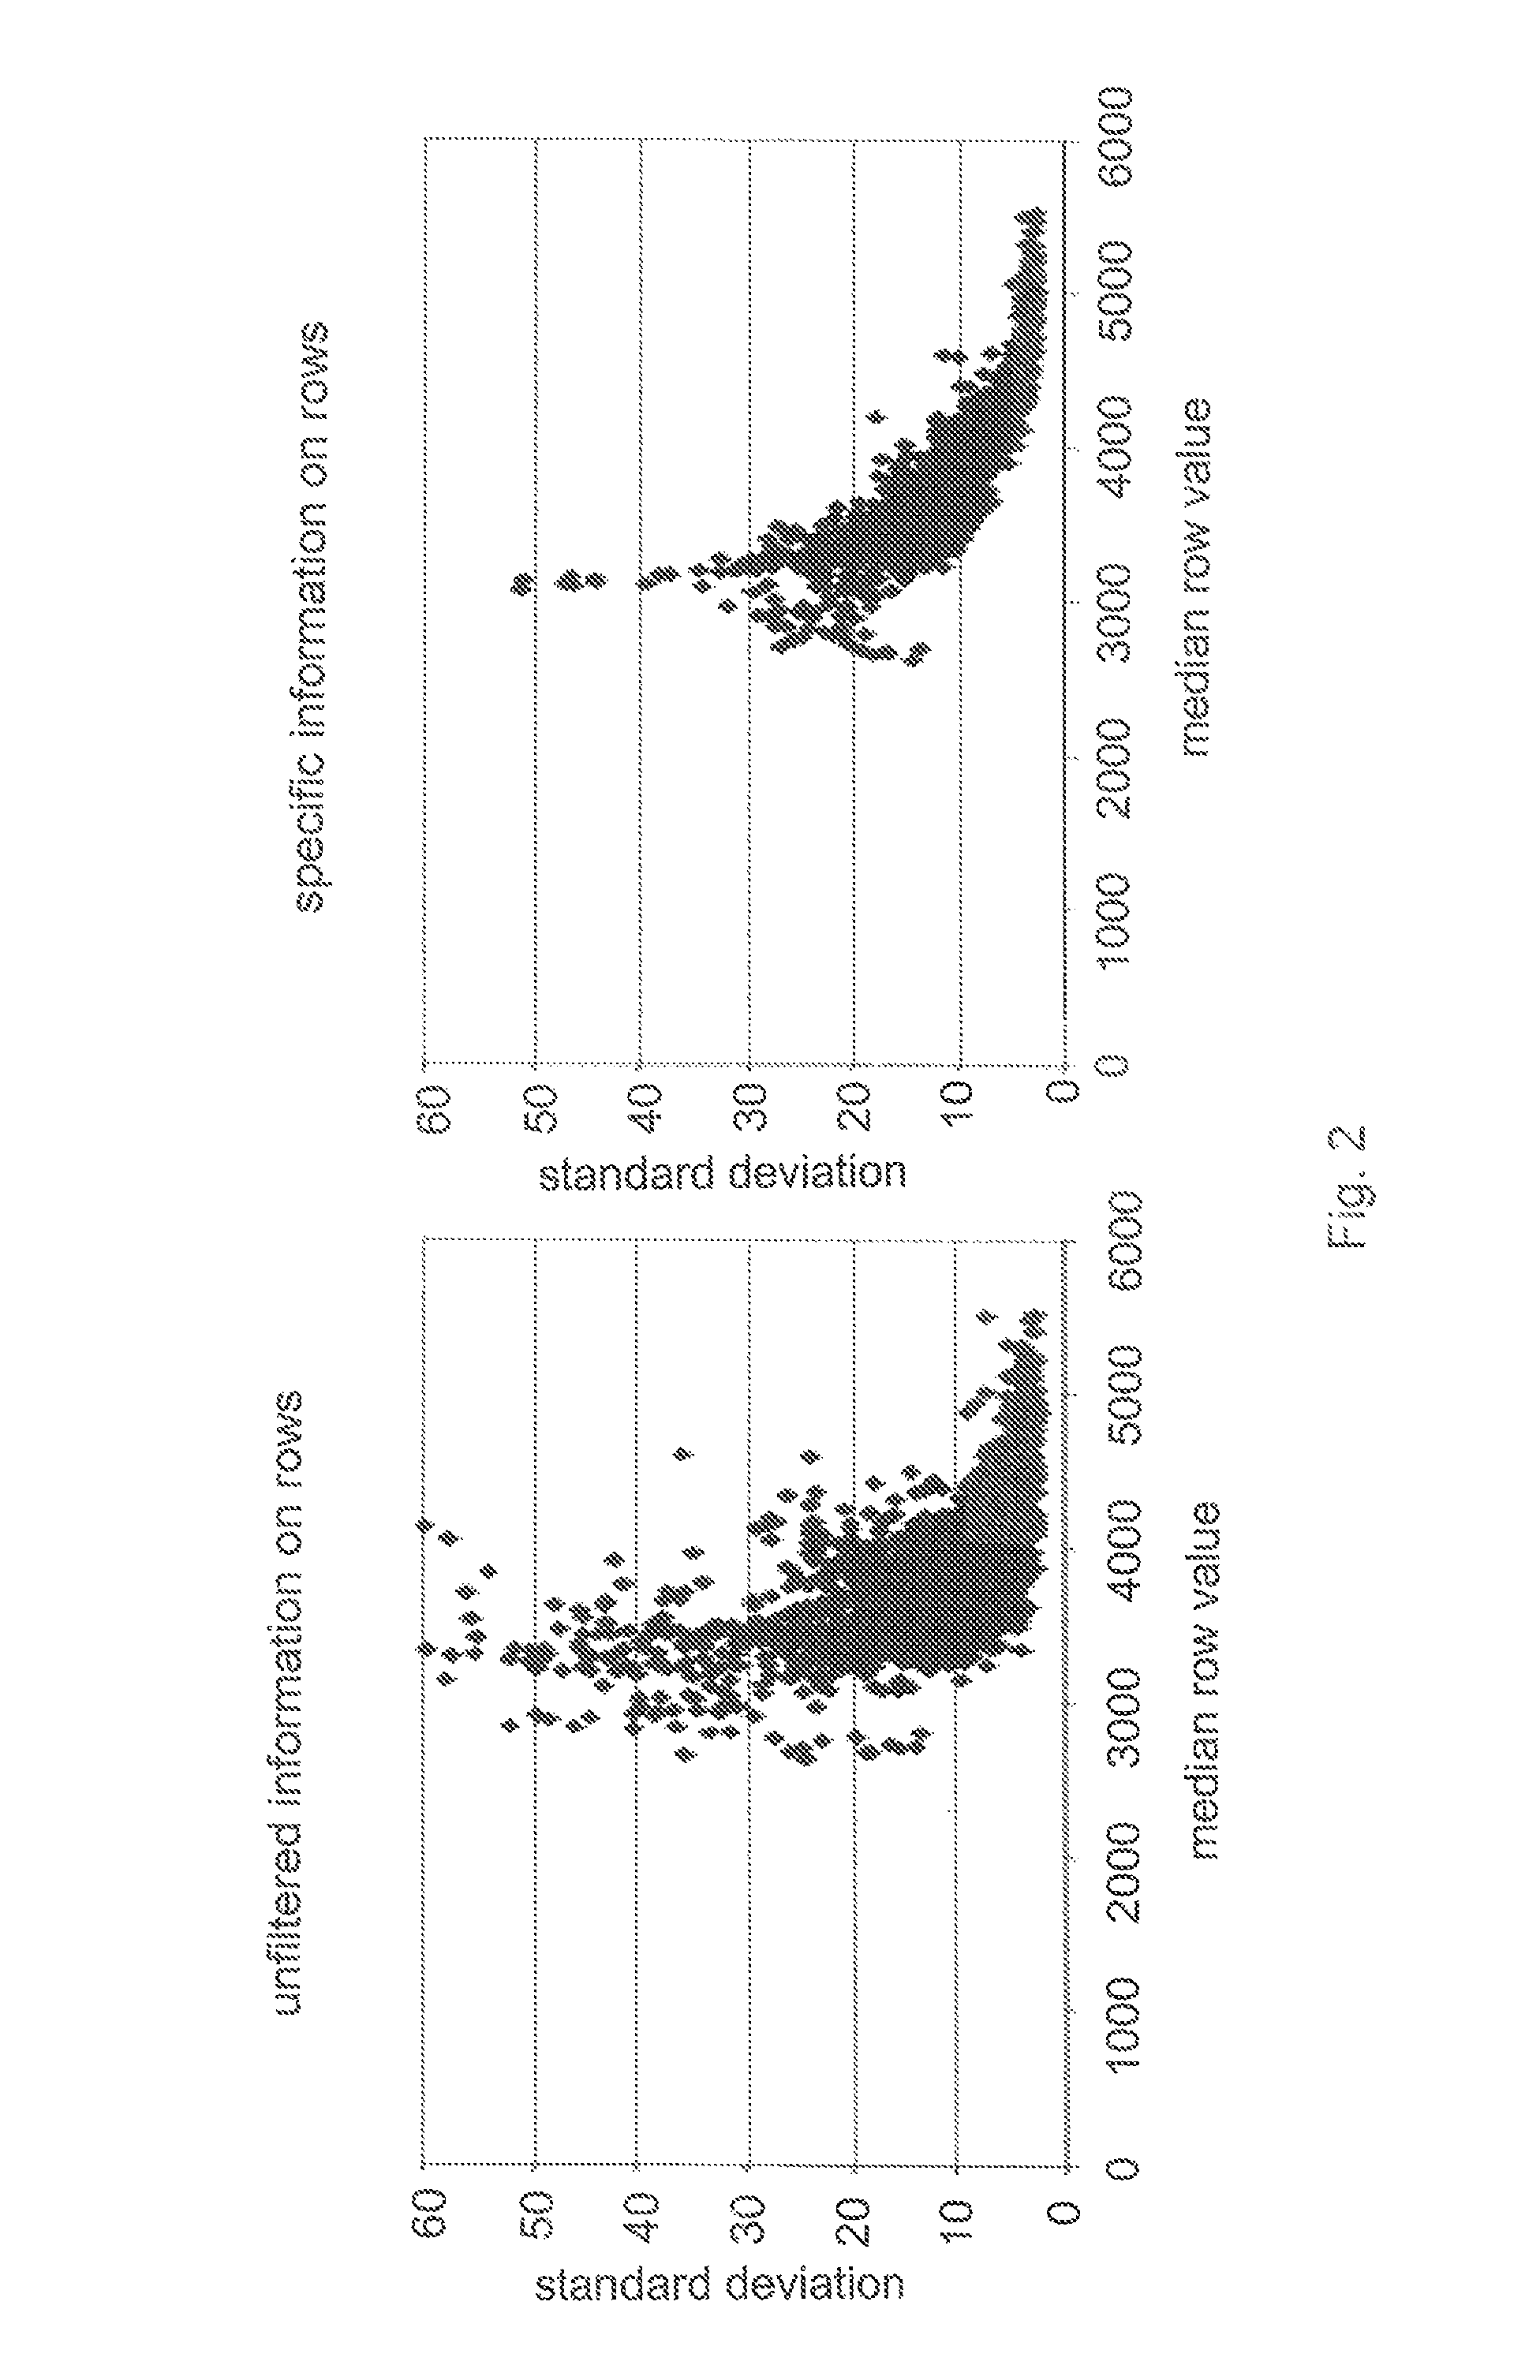 Estimating an offset image of a new imaging device from the offset image of an aged imaging device